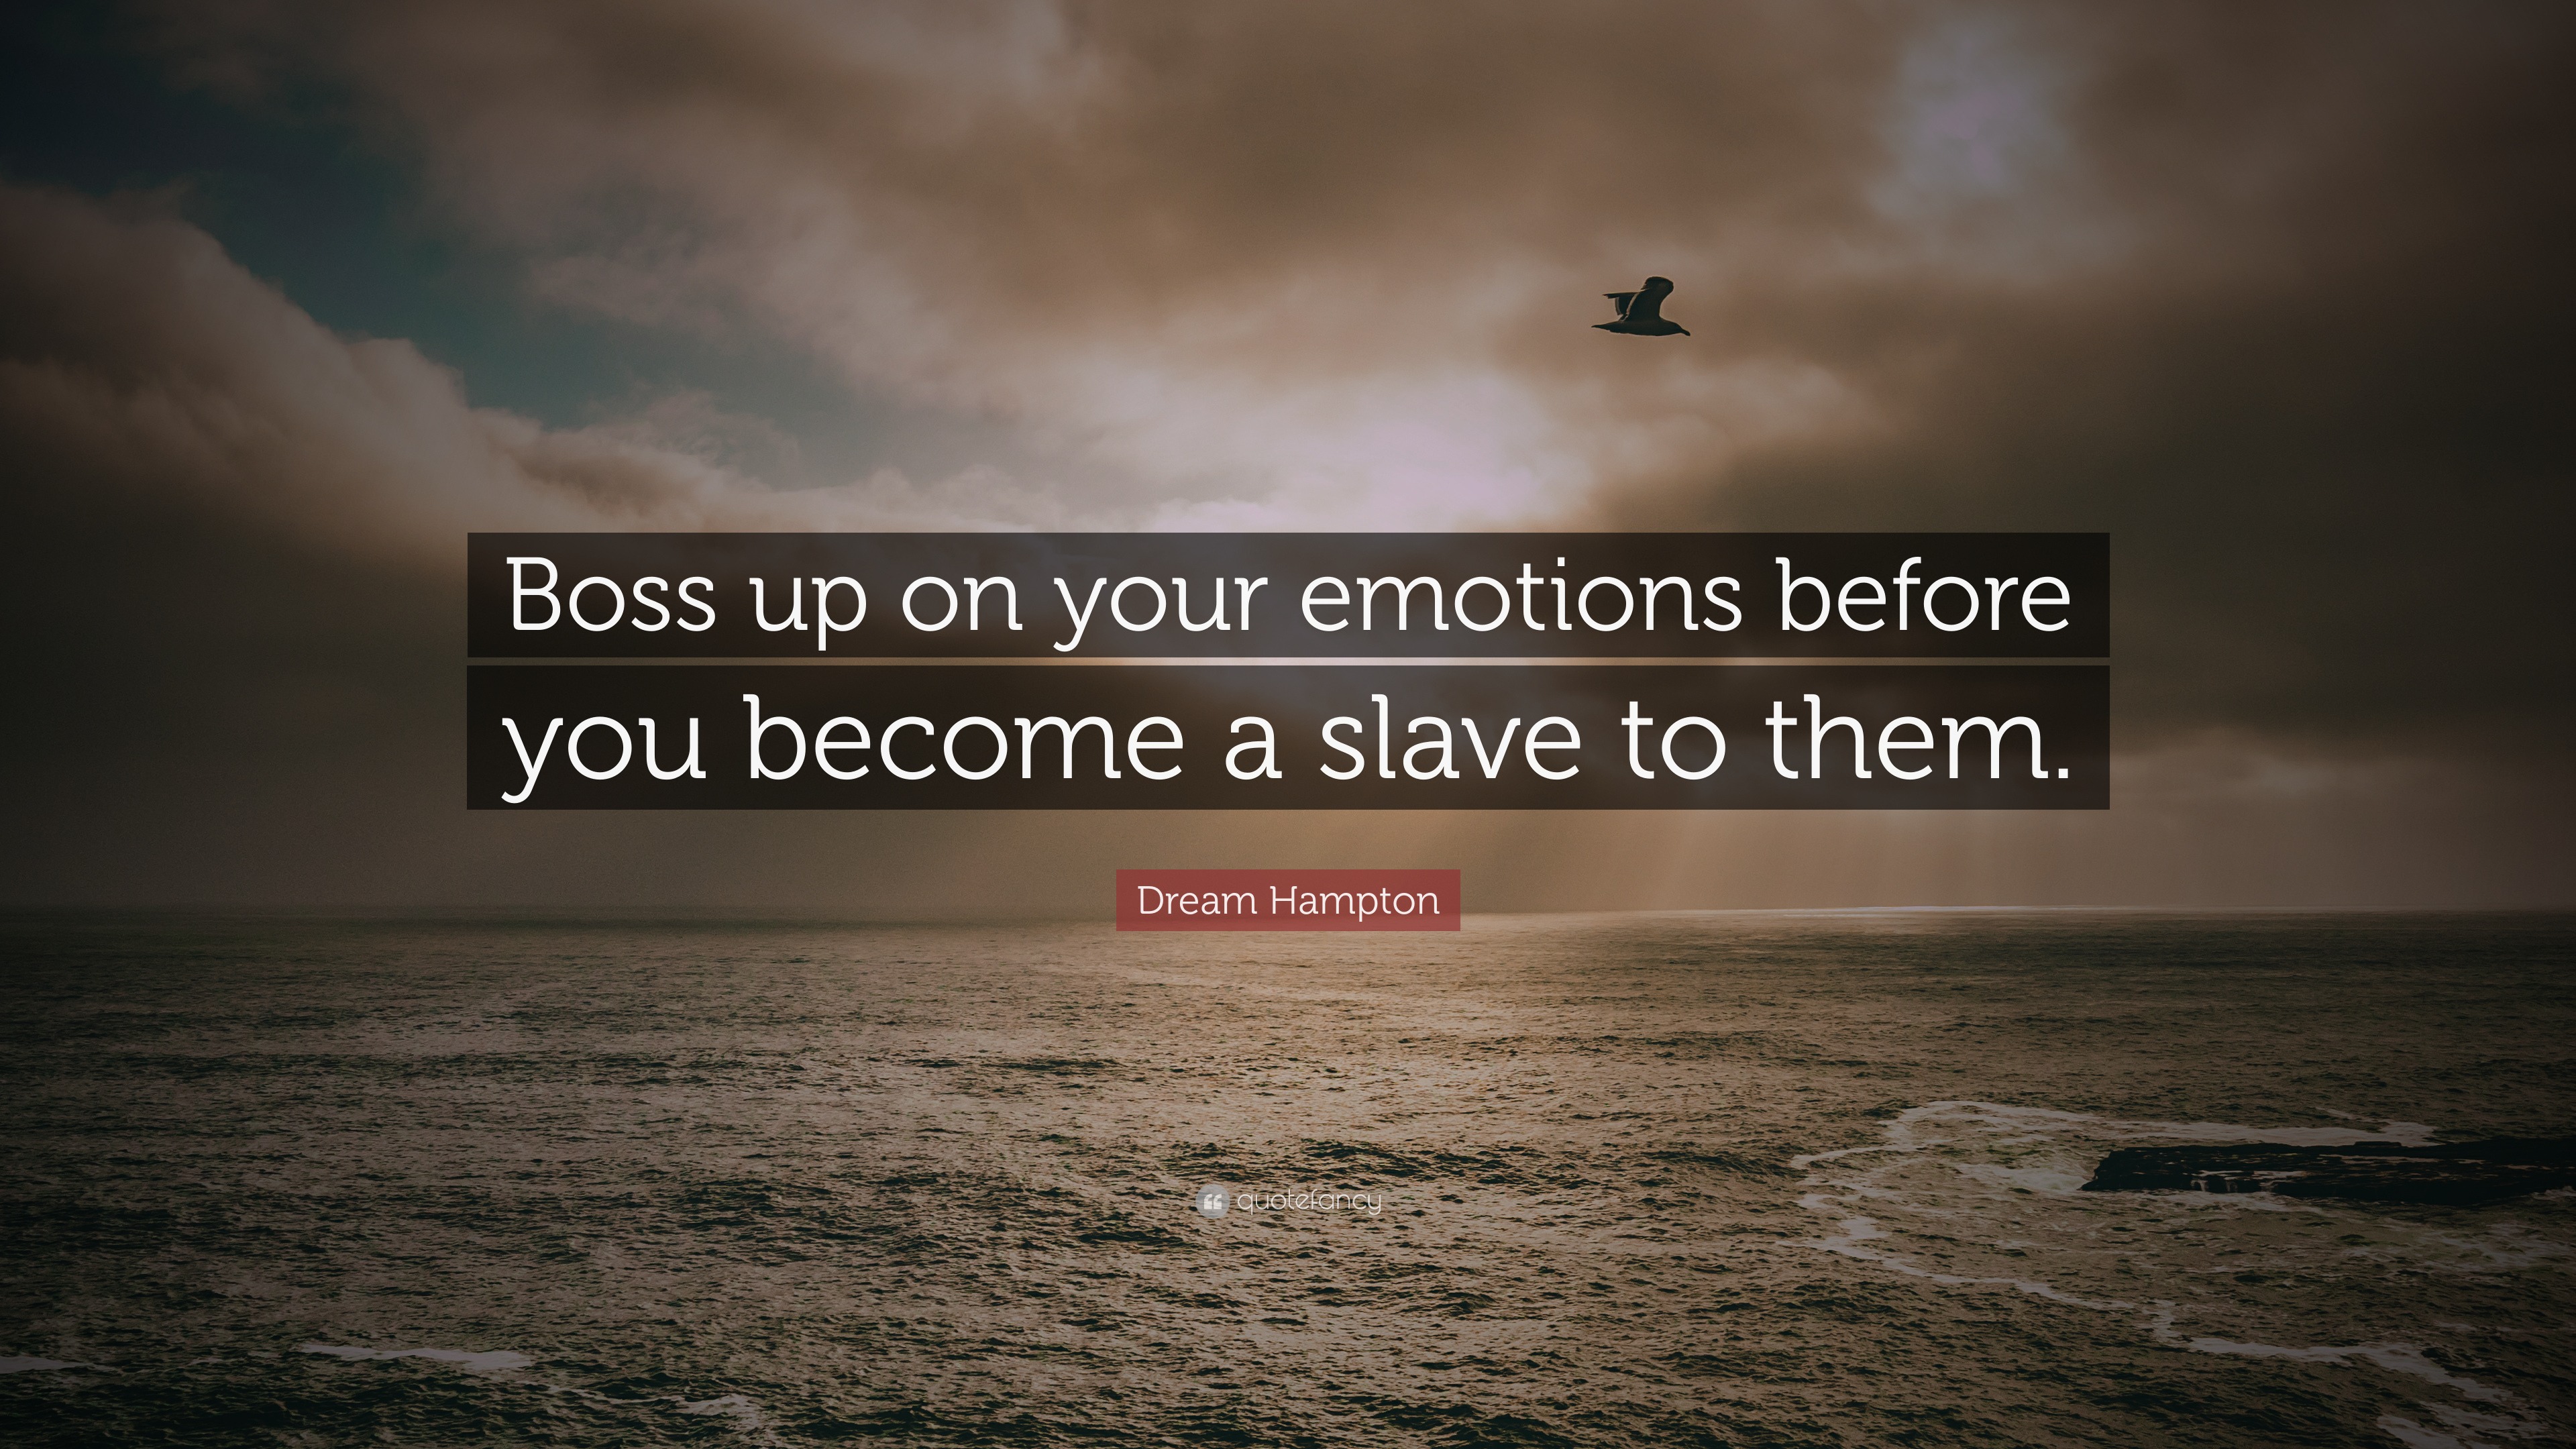 Dream Hampton Quote: “Boss up on your emotions before you become a slave them.”